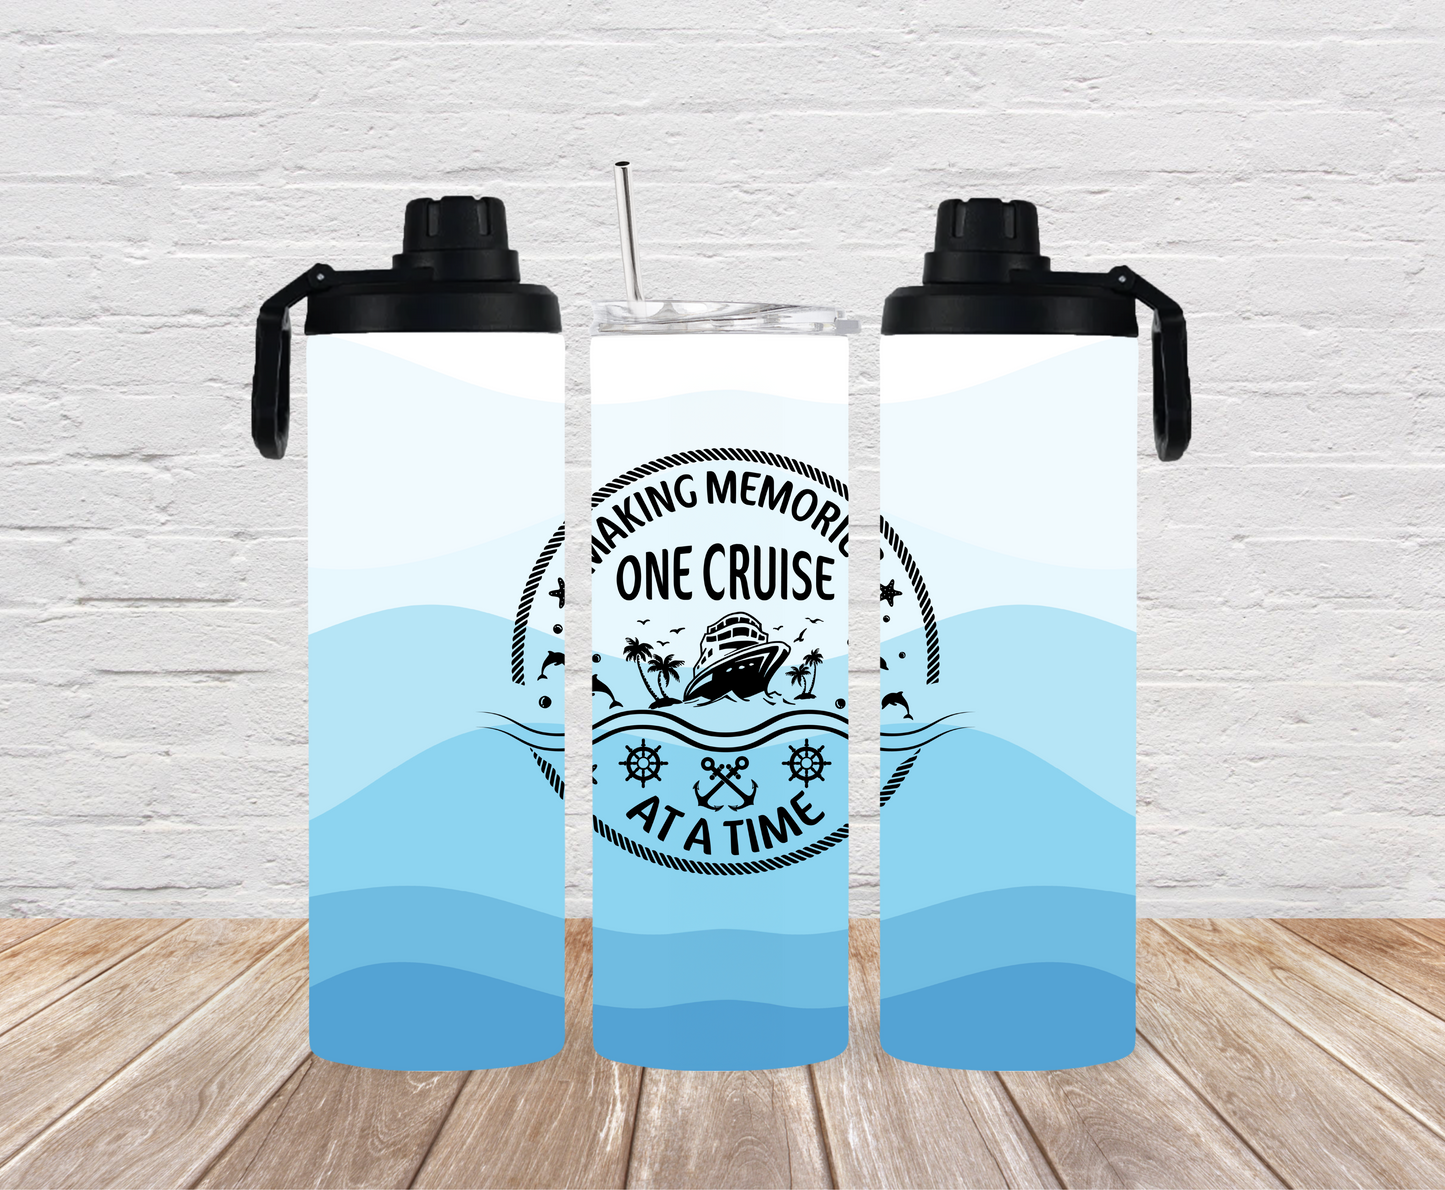 Making Memories One Cruise At a Time - Blue Waves Tumbler